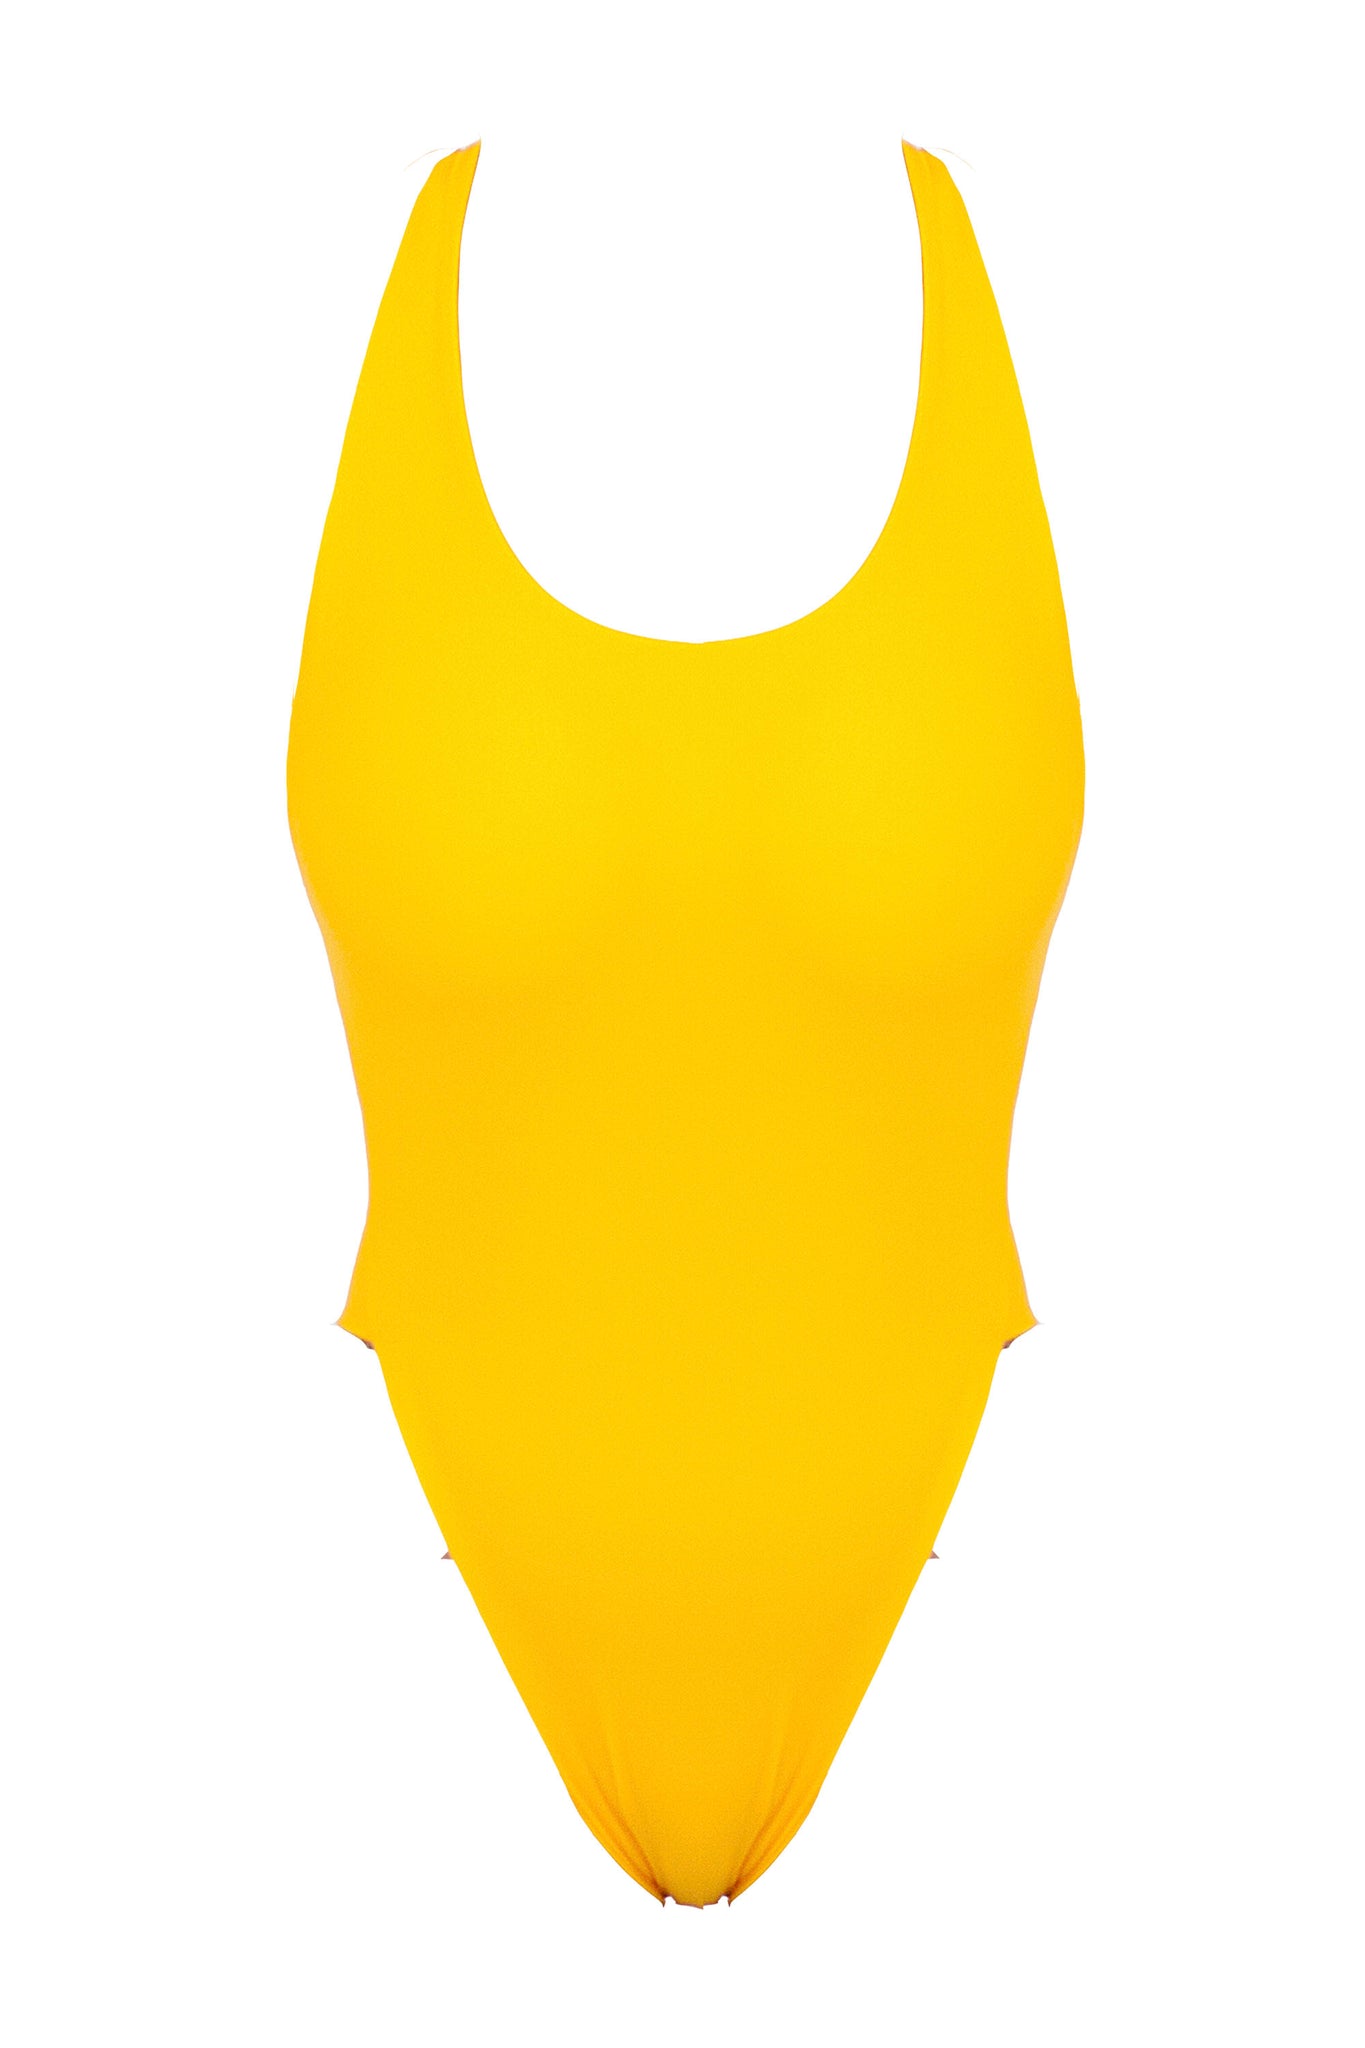 A yellow high-cut one piece swimsuit with thick supportive straps.